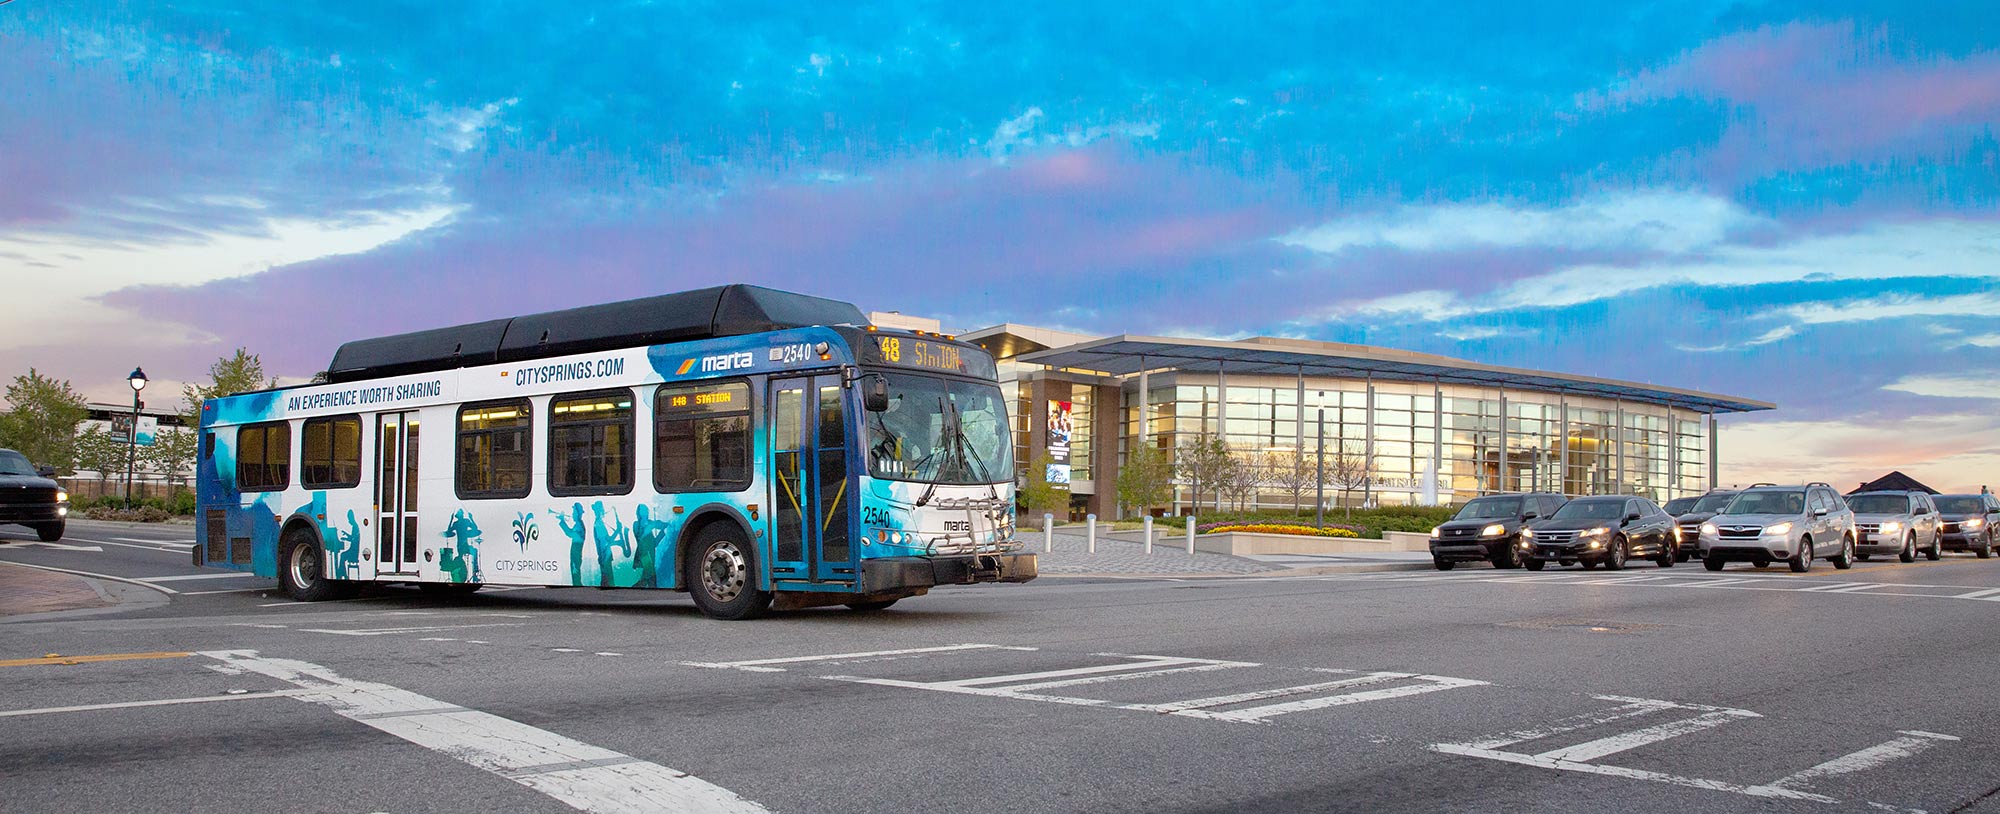 A MARTA Bus turns the corner on Mt. Vernon Hwy - It is wrapped in a City Springs design; blue and white watercolors feature silhouettes of people playing musical instruments